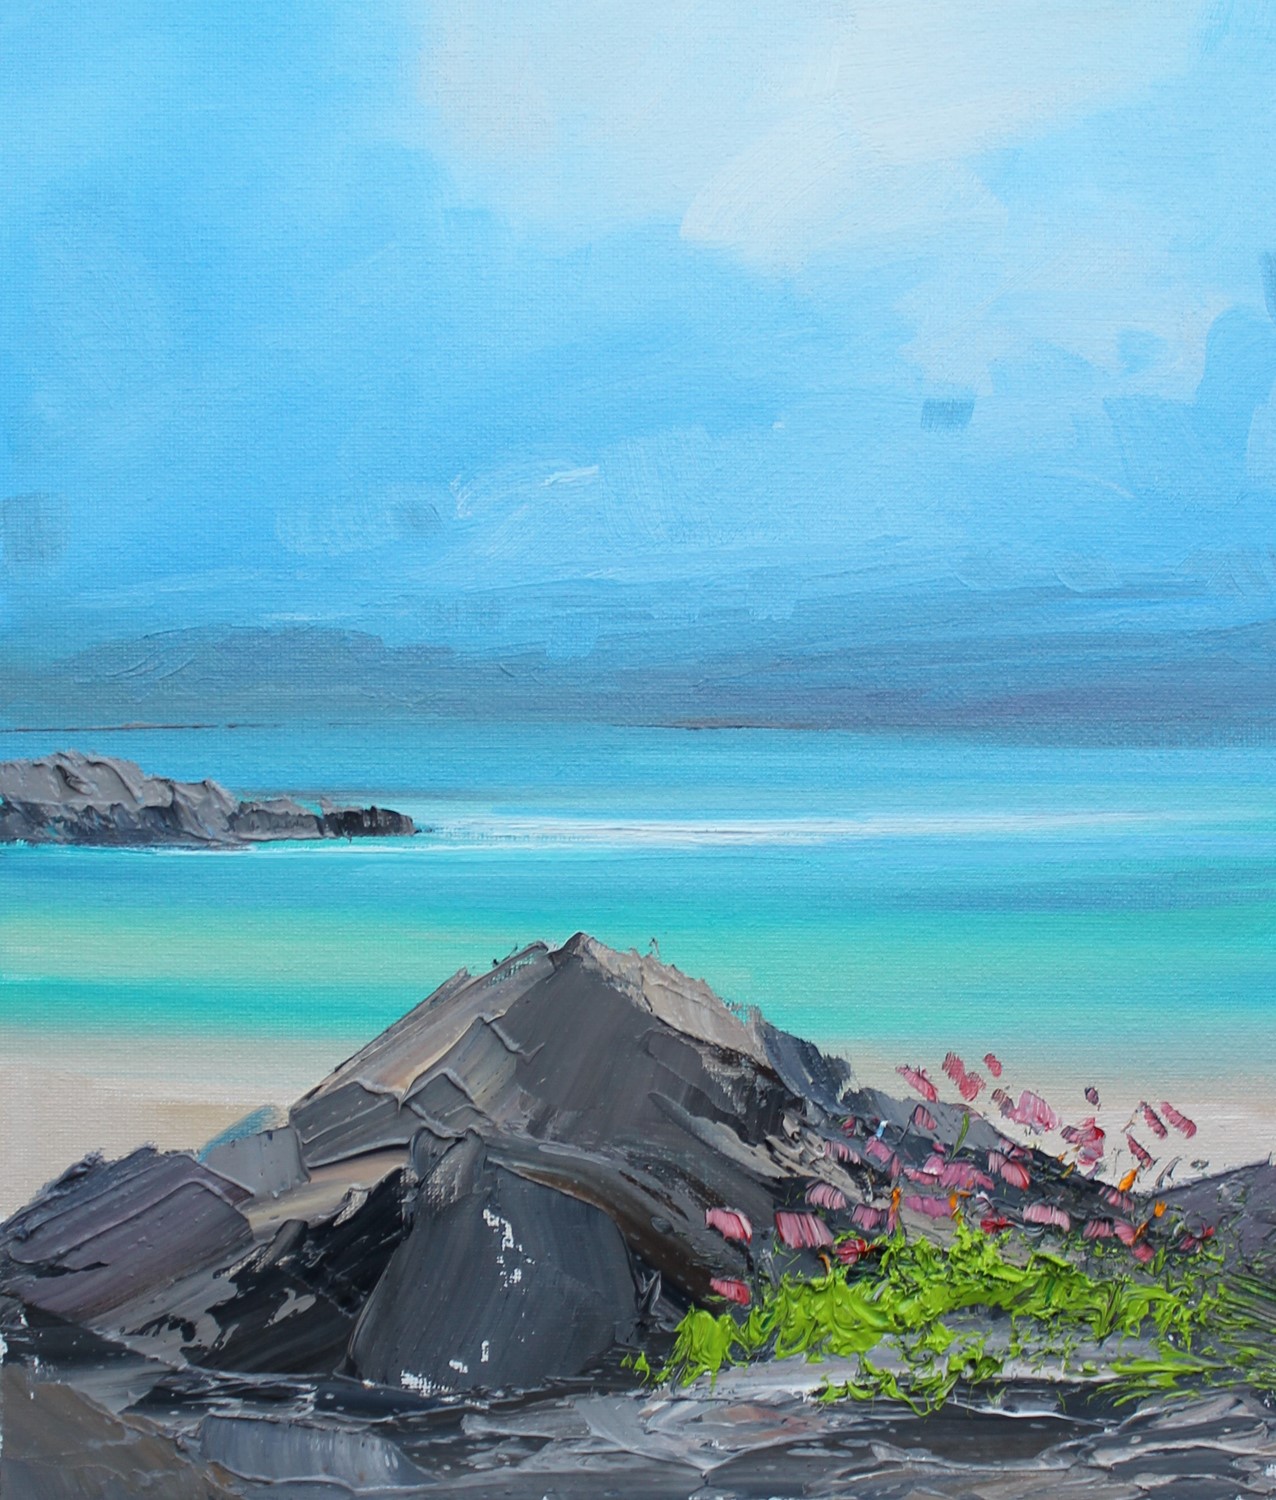 'Sea Thrift Lining the Shore' by artist Rosanne Barr